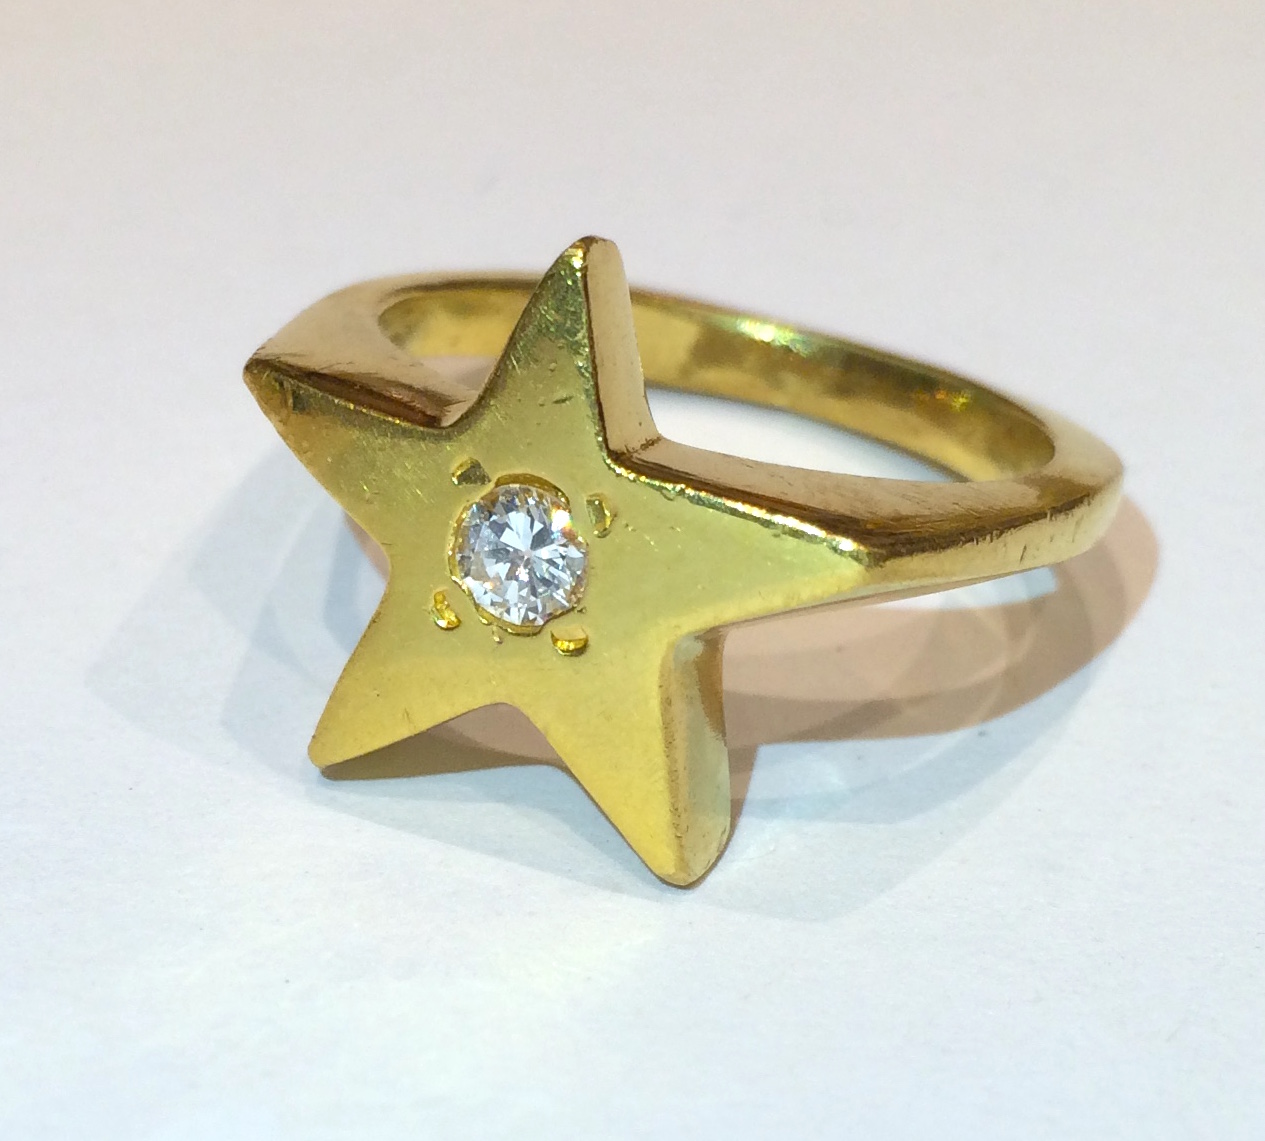 “Star” ring, 18K gold set with a round diamond, c. 2010